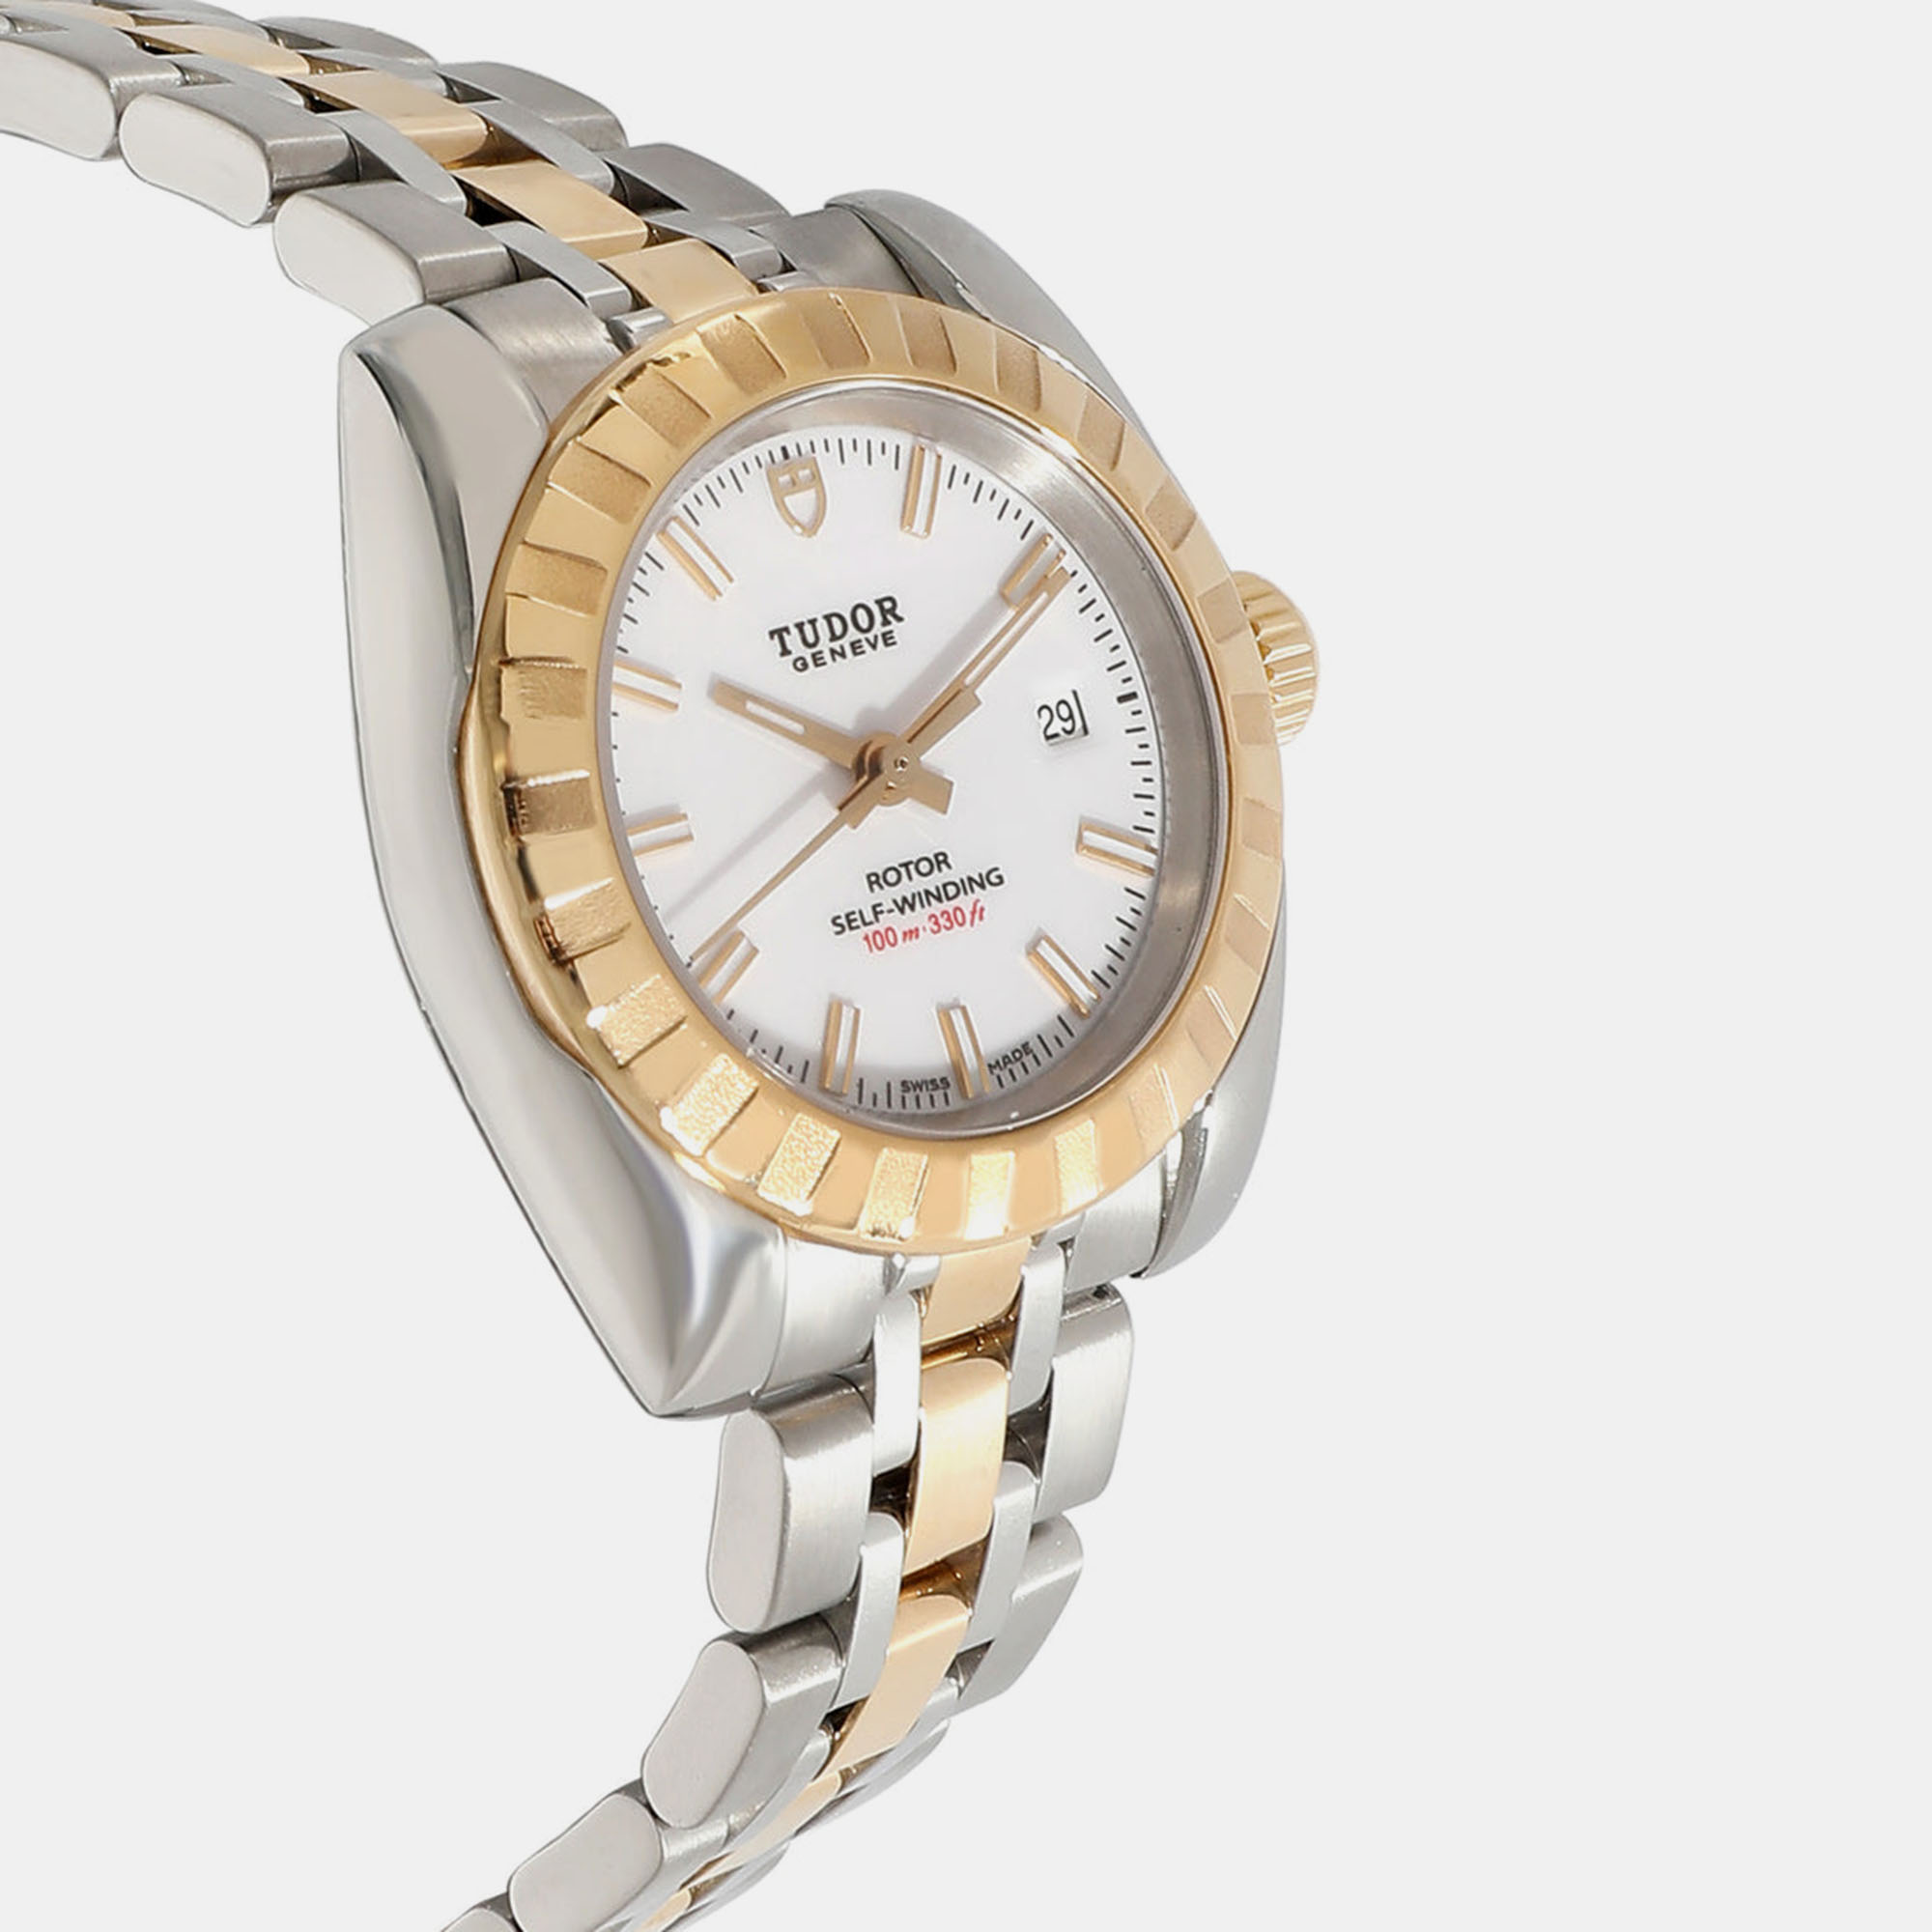 

Tudor White 18k Yellow Gold And Stainless Steel Classic 22013 Automatic Women's Wristwatch 28 mm